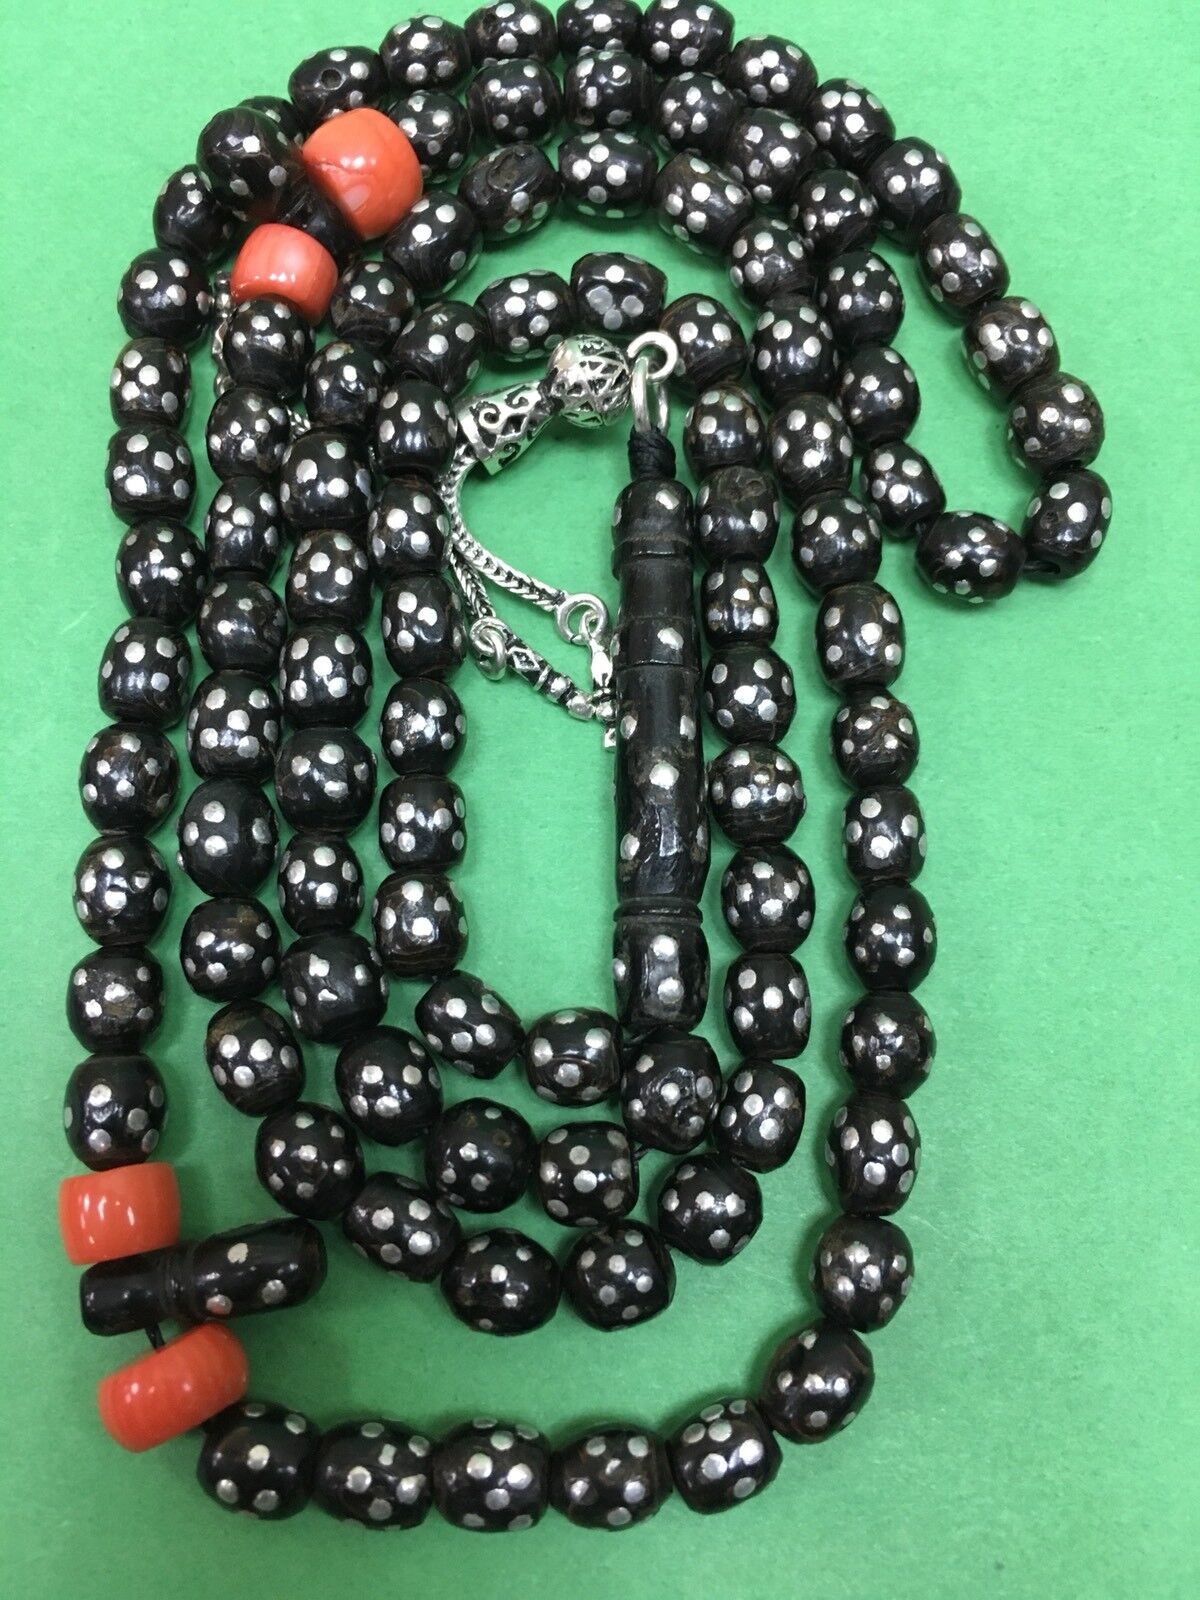 Antique Black Coral -Silver In Lay 99 Worry Beads Islamic Masbaha 46Grams -##